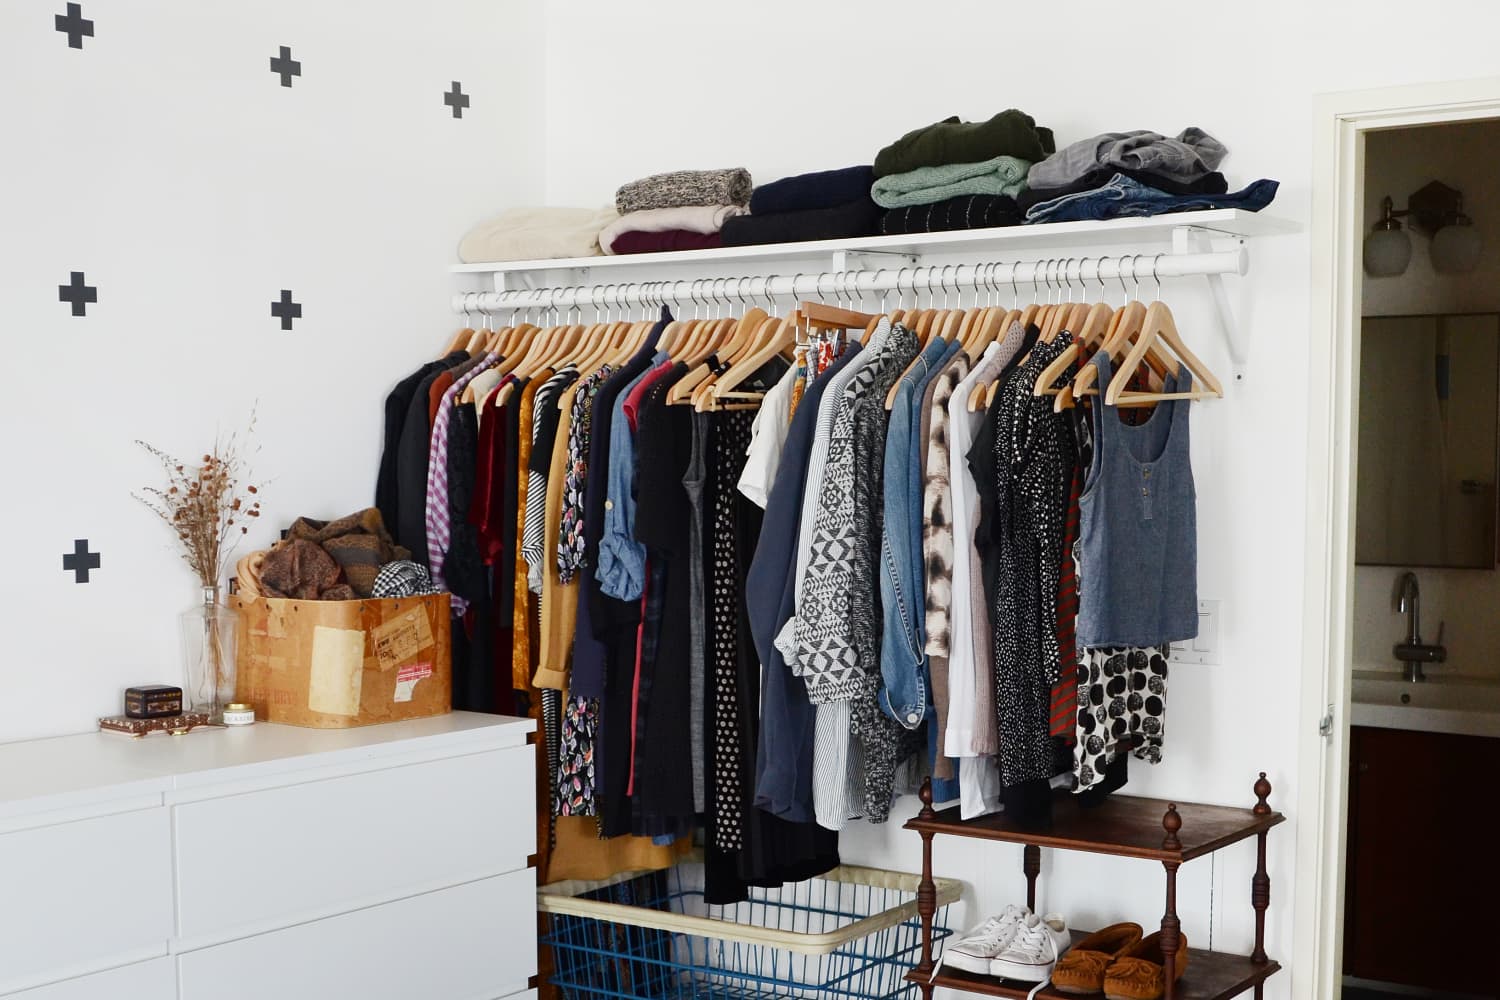 How to store clothes in a bedroom without a closet and dresser - Quora